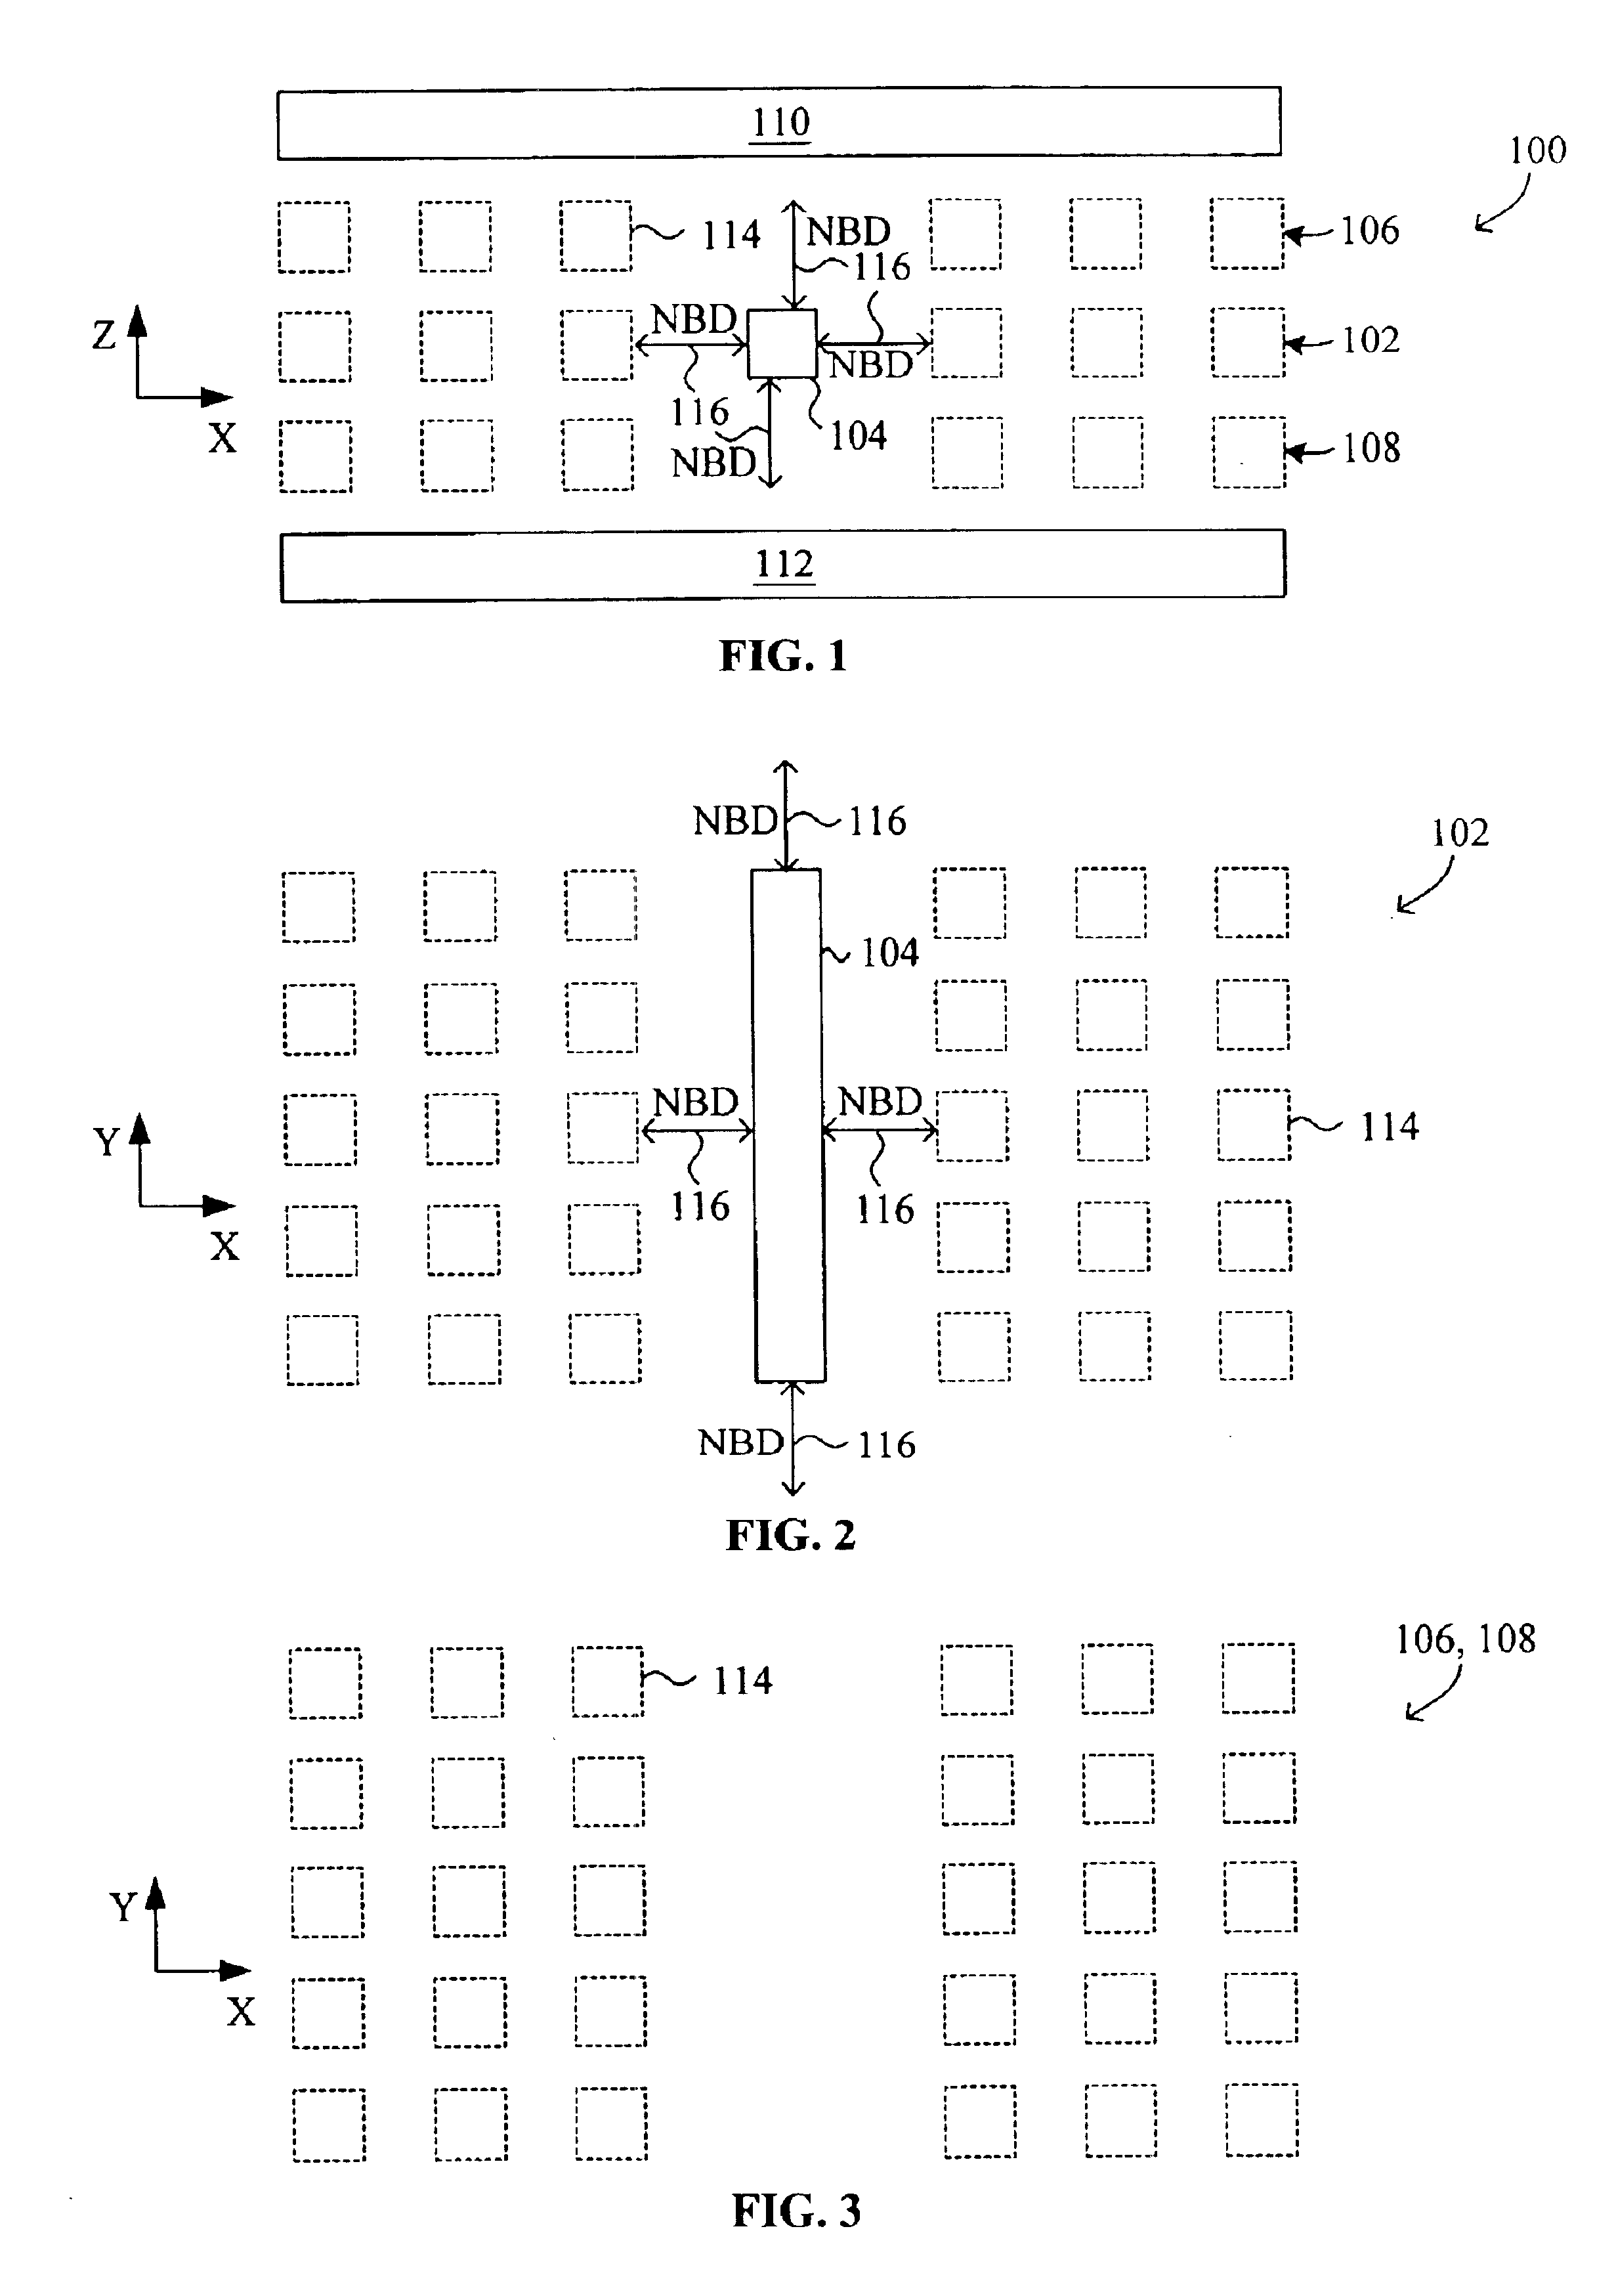 System and method for placement of dummy metal fills while preserving device matching and/or limiting capacitance increase